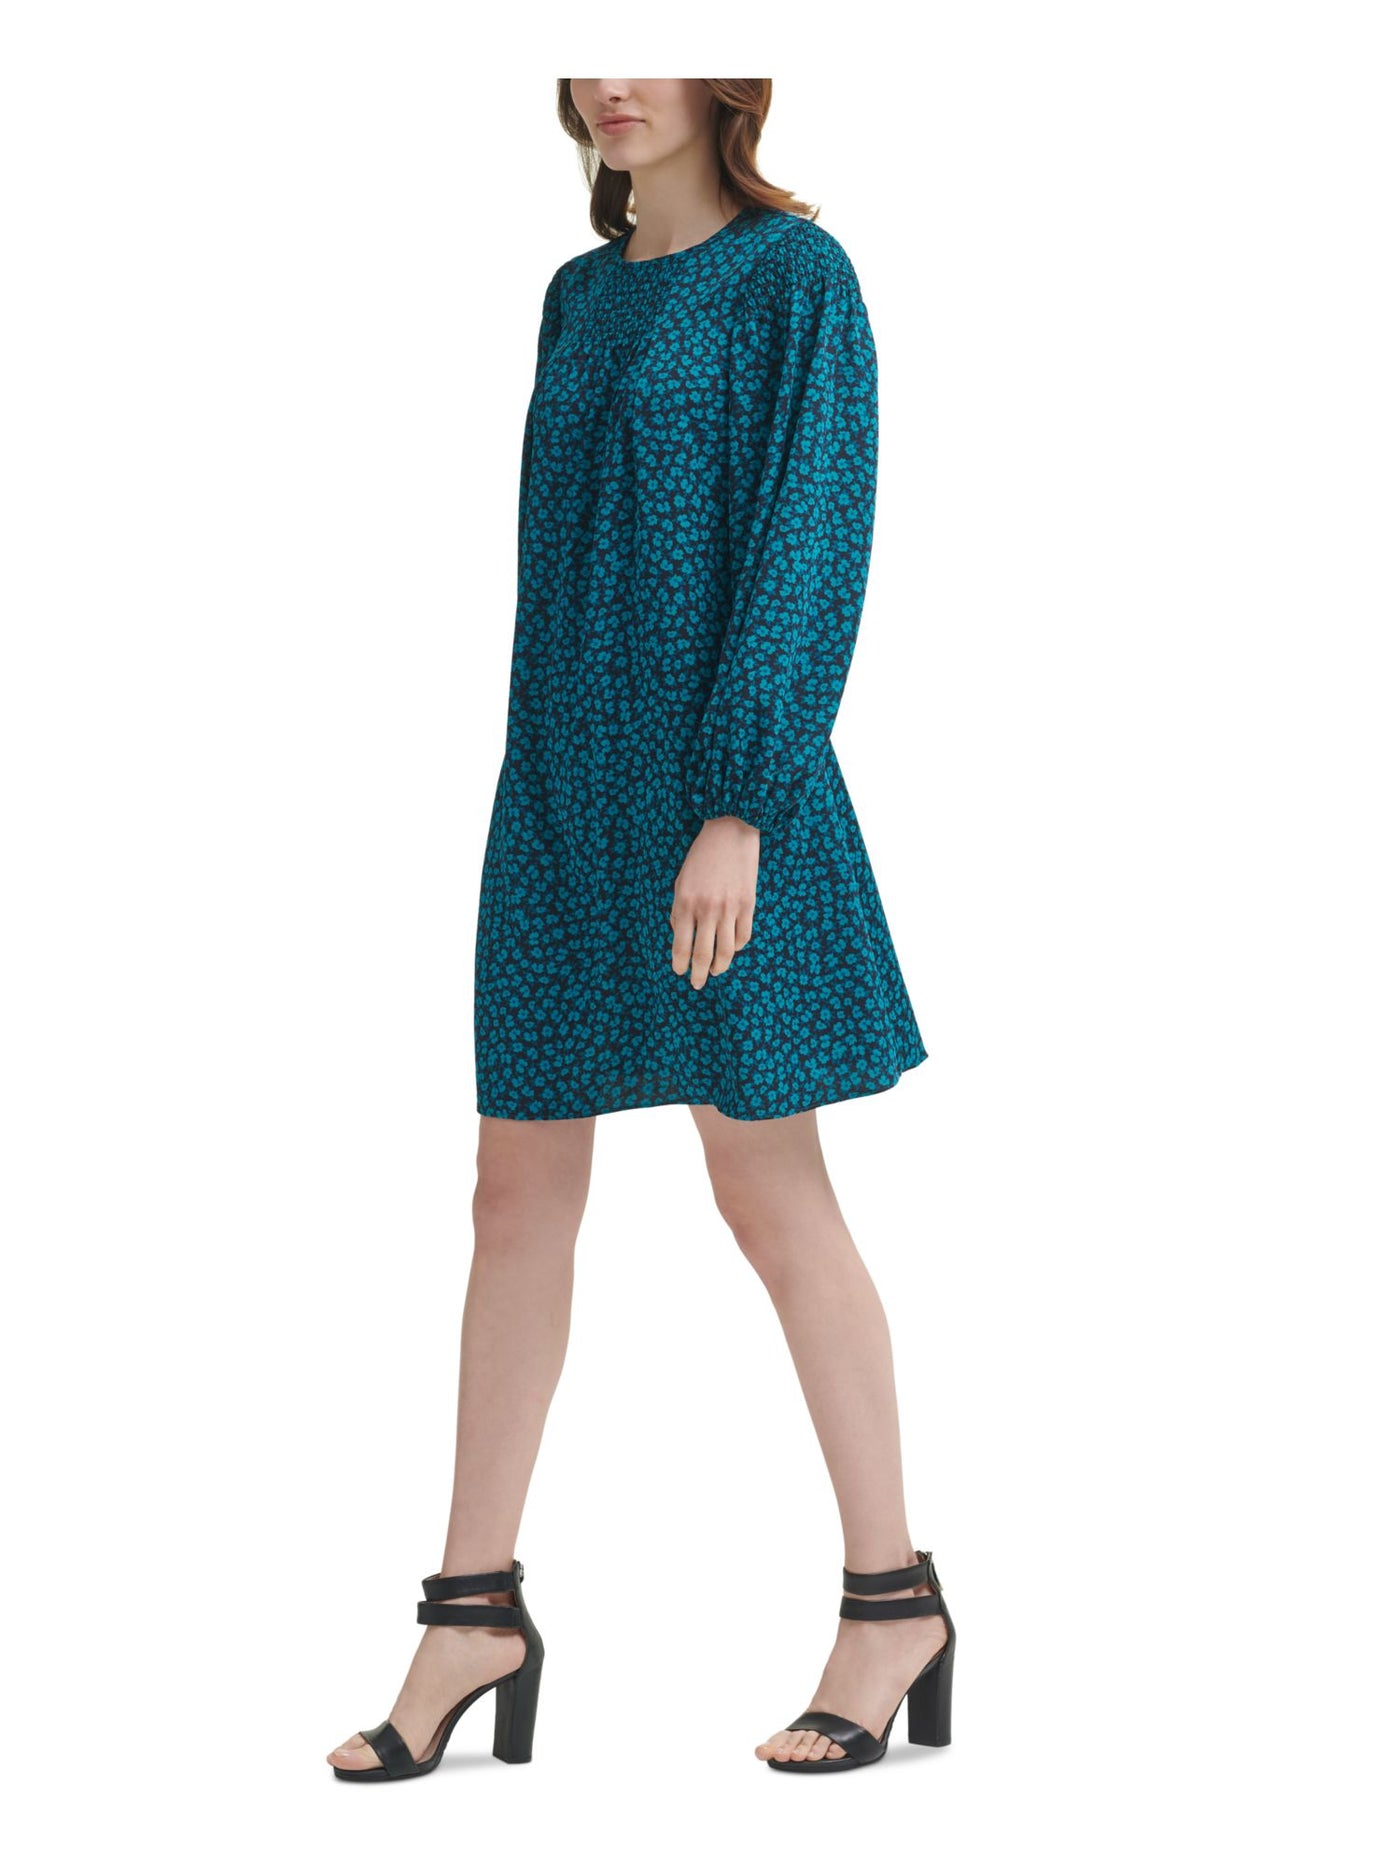 DKNY Womens Teal Smocked Floral Long Sleeve Round Neck Short Evening Shift Dress 16